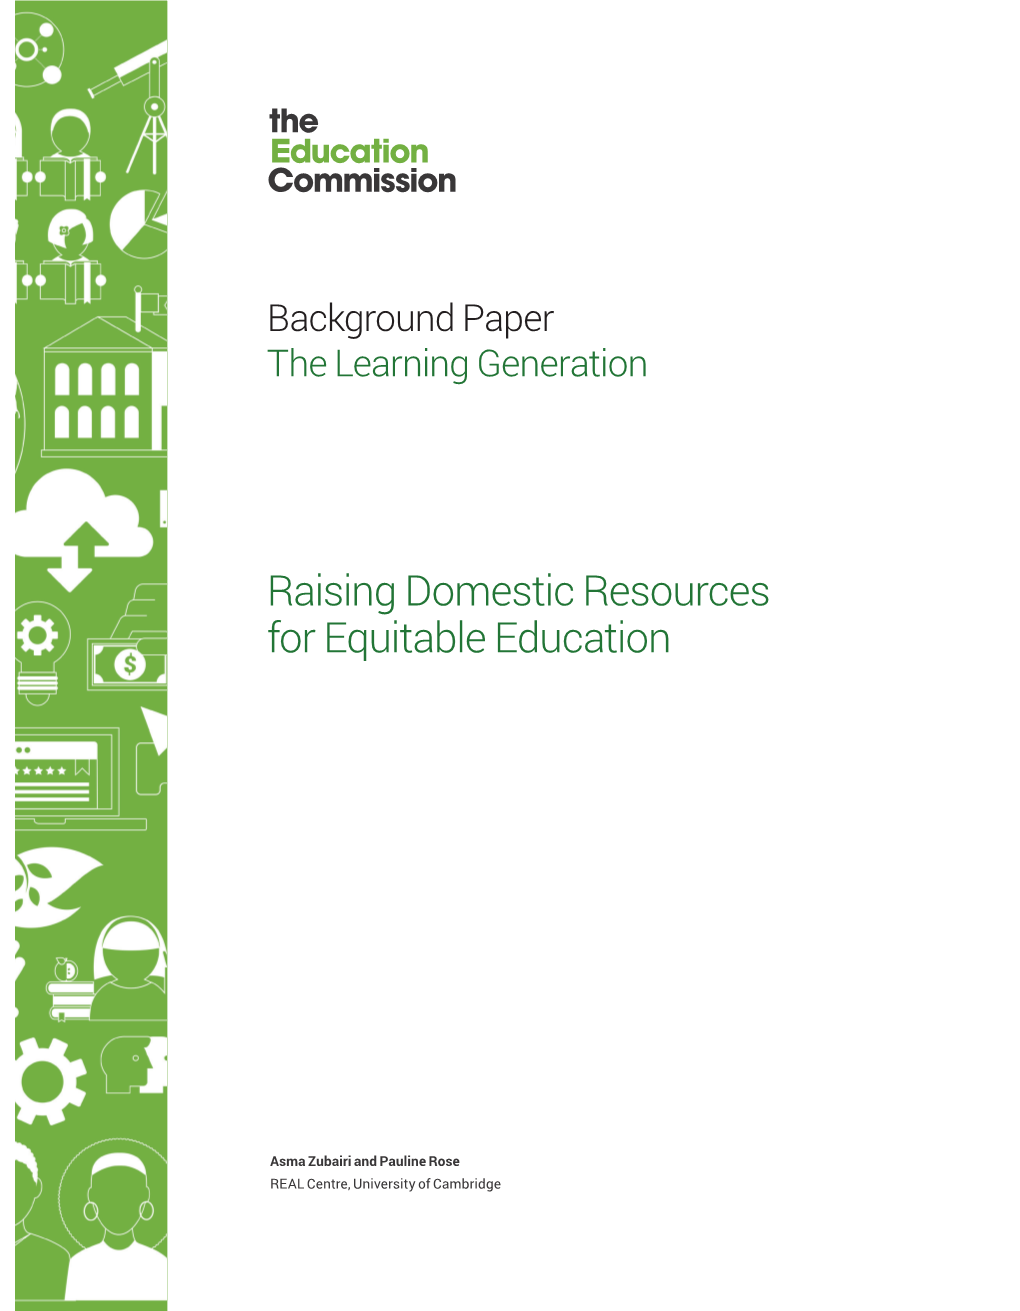 Raising Domestic Resources for Equitable Education